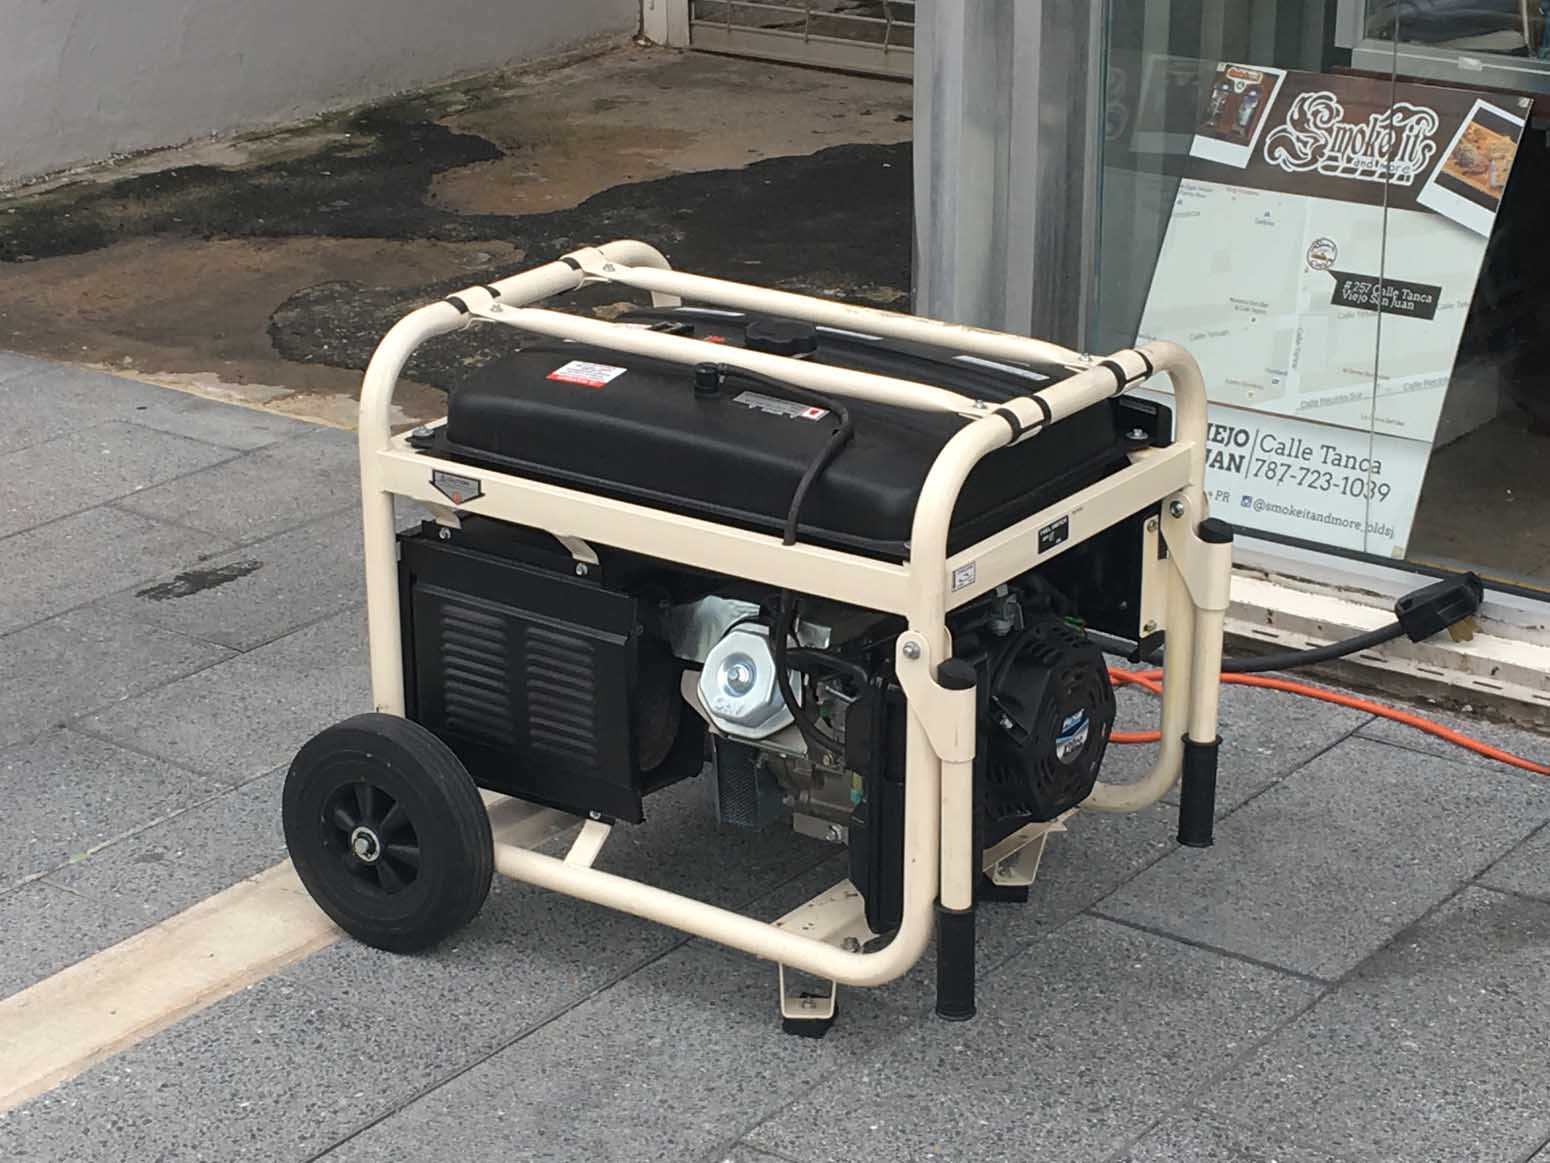 Small generator keeping a local shop open